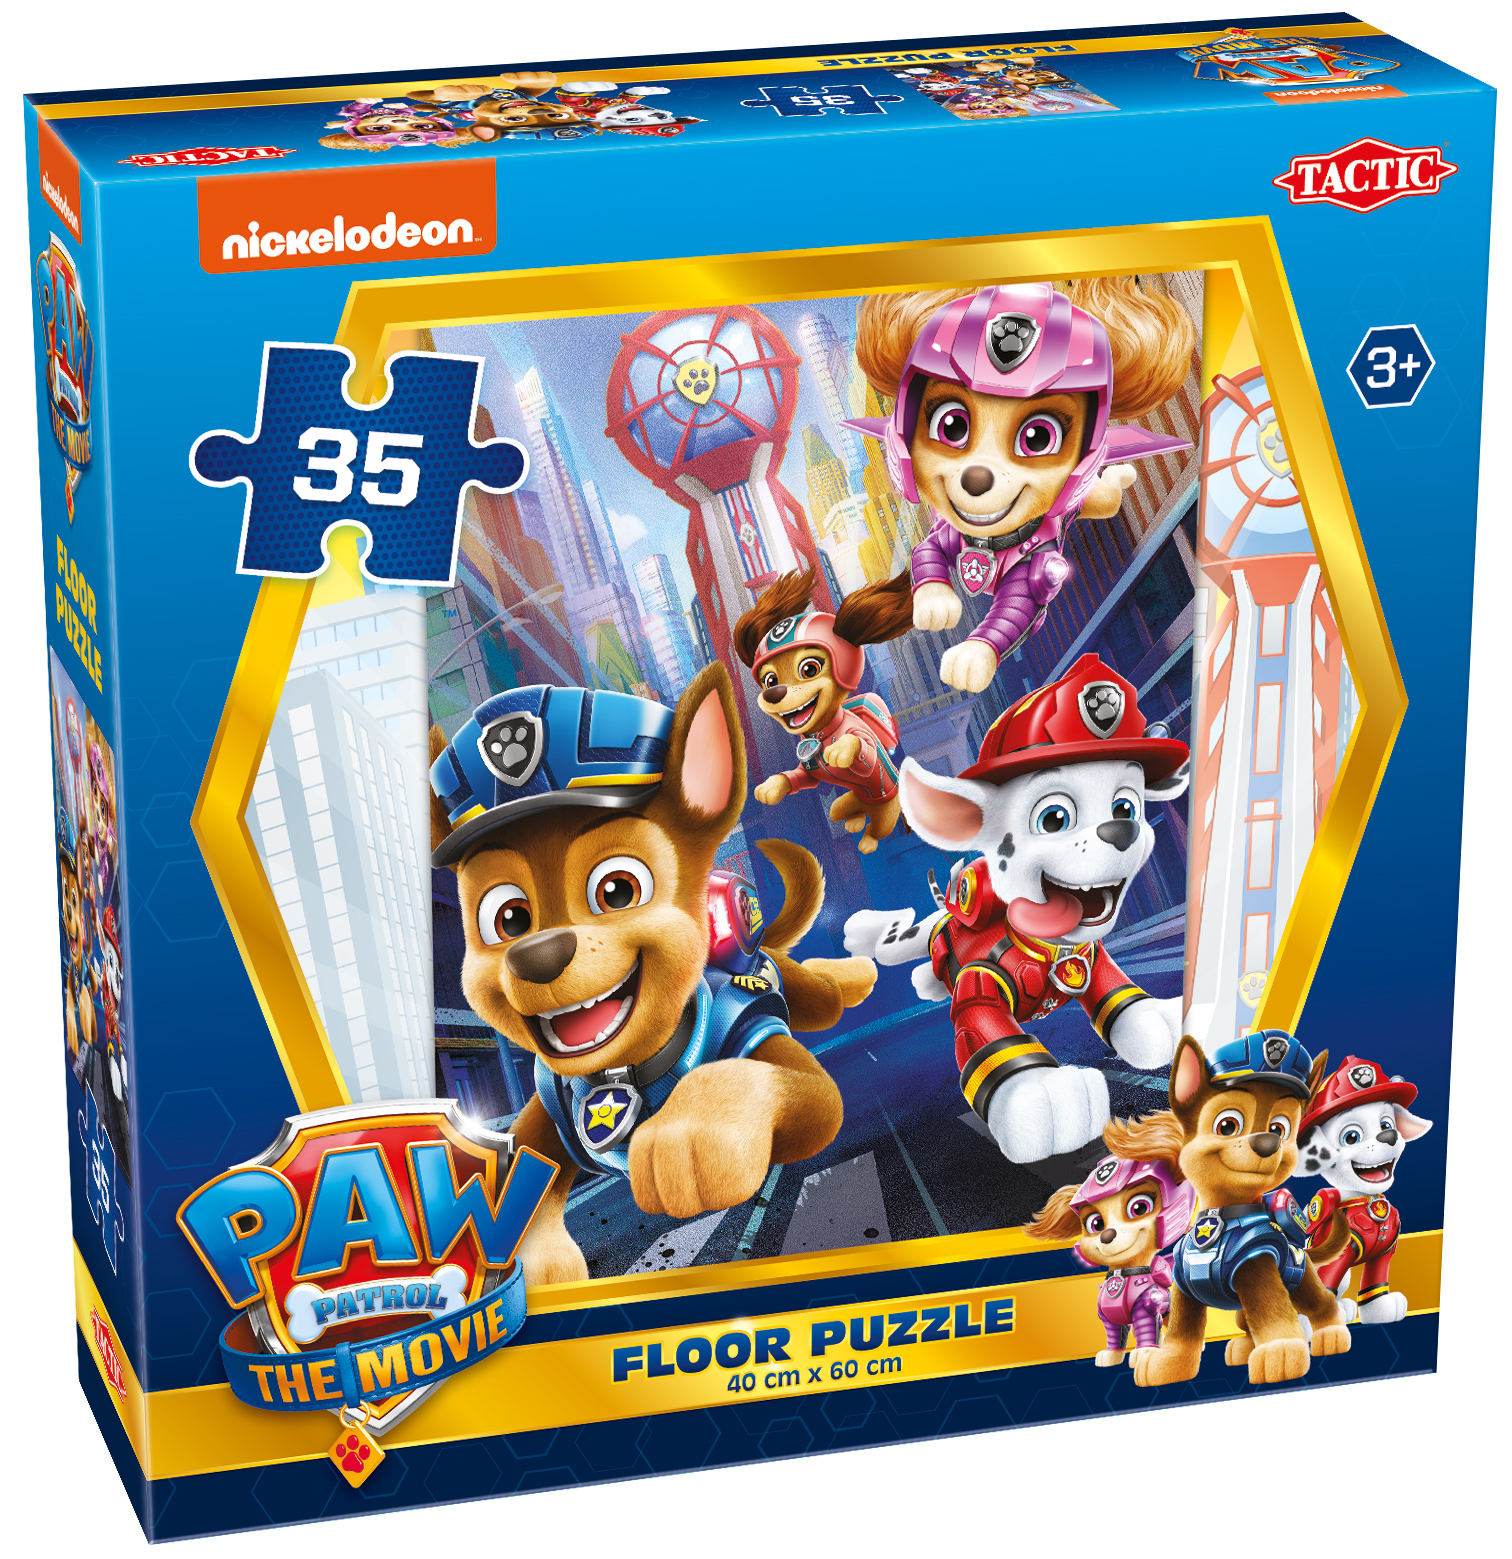 Tactic PAW Patrol The Movie